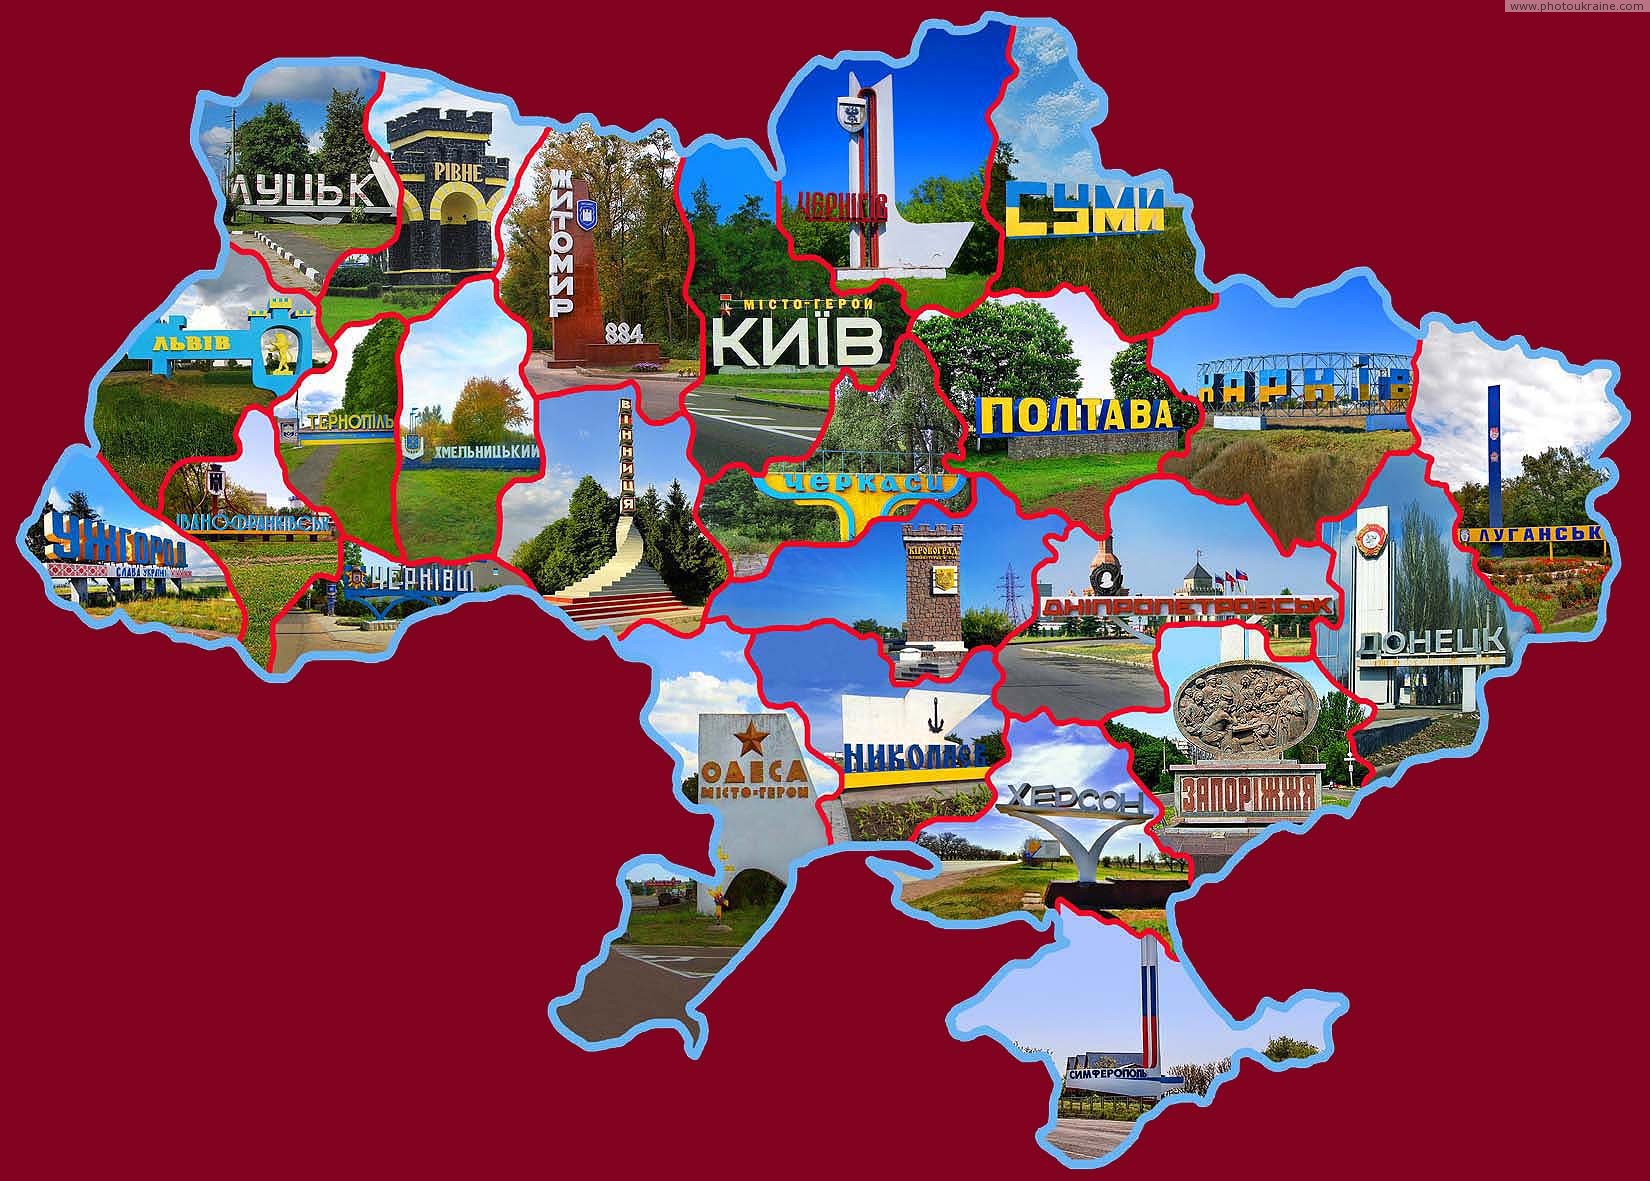 Road signs of the centers of administrative regions of Ukraine